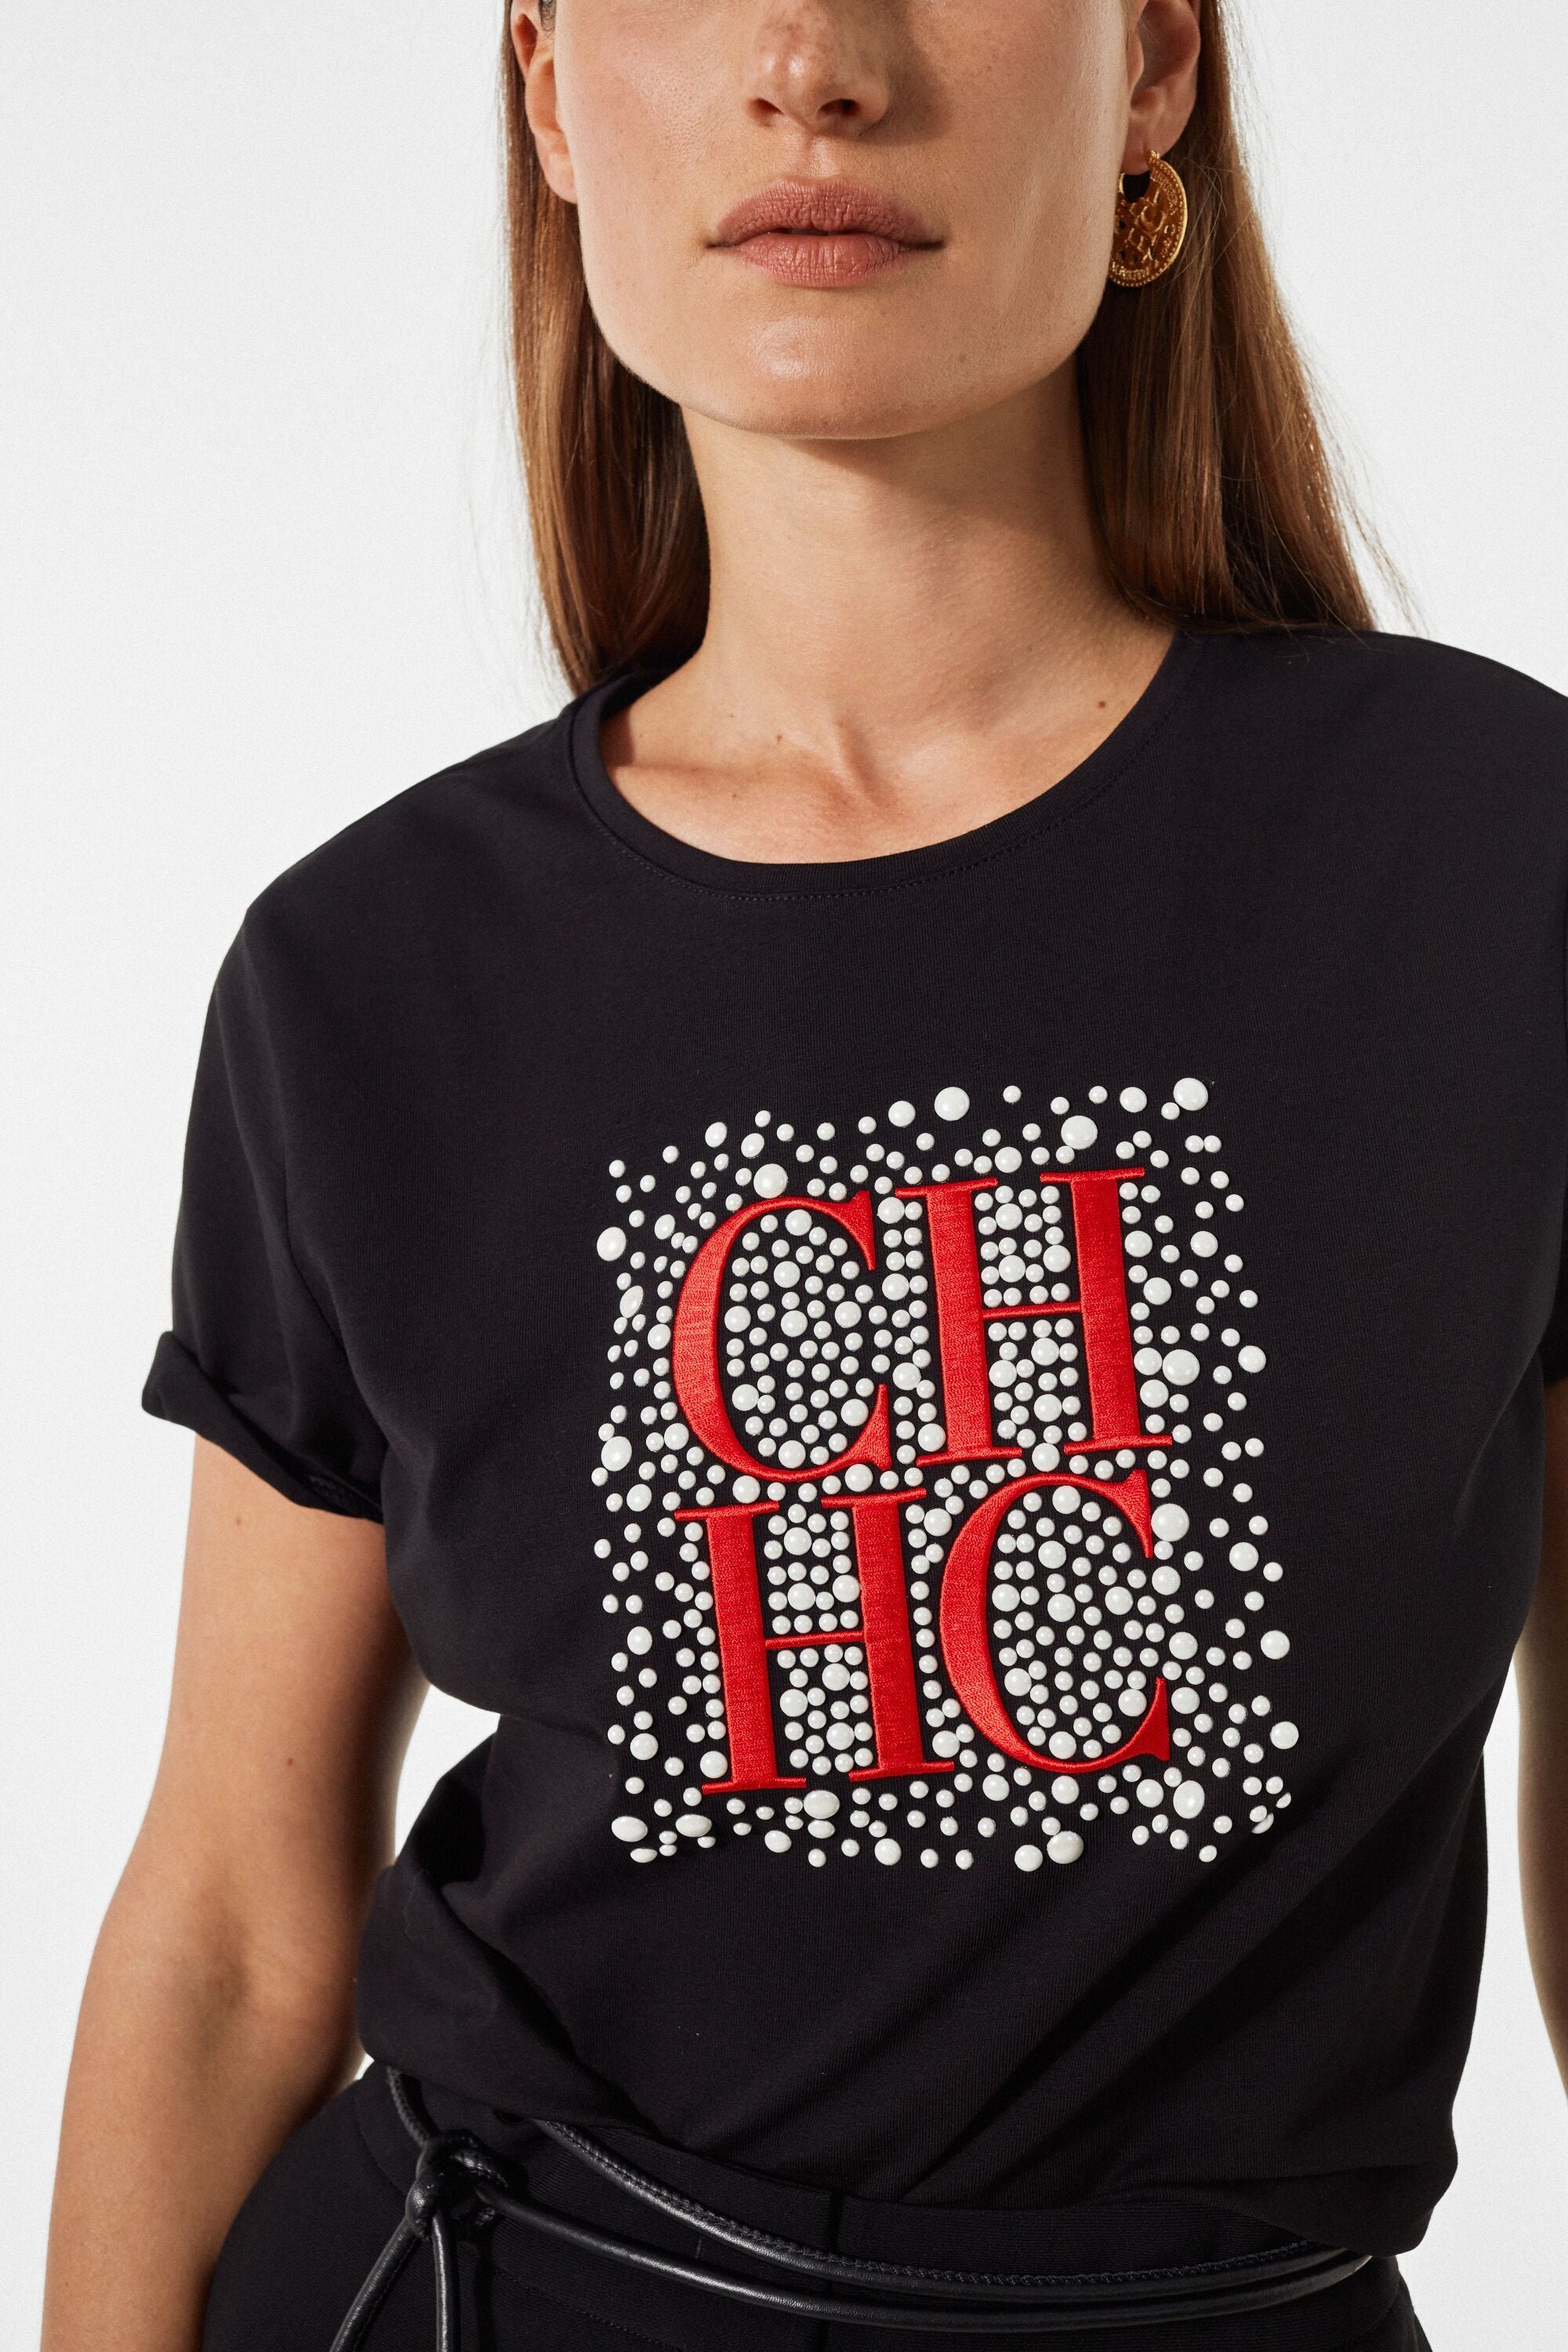 CH t-shirt with pearls